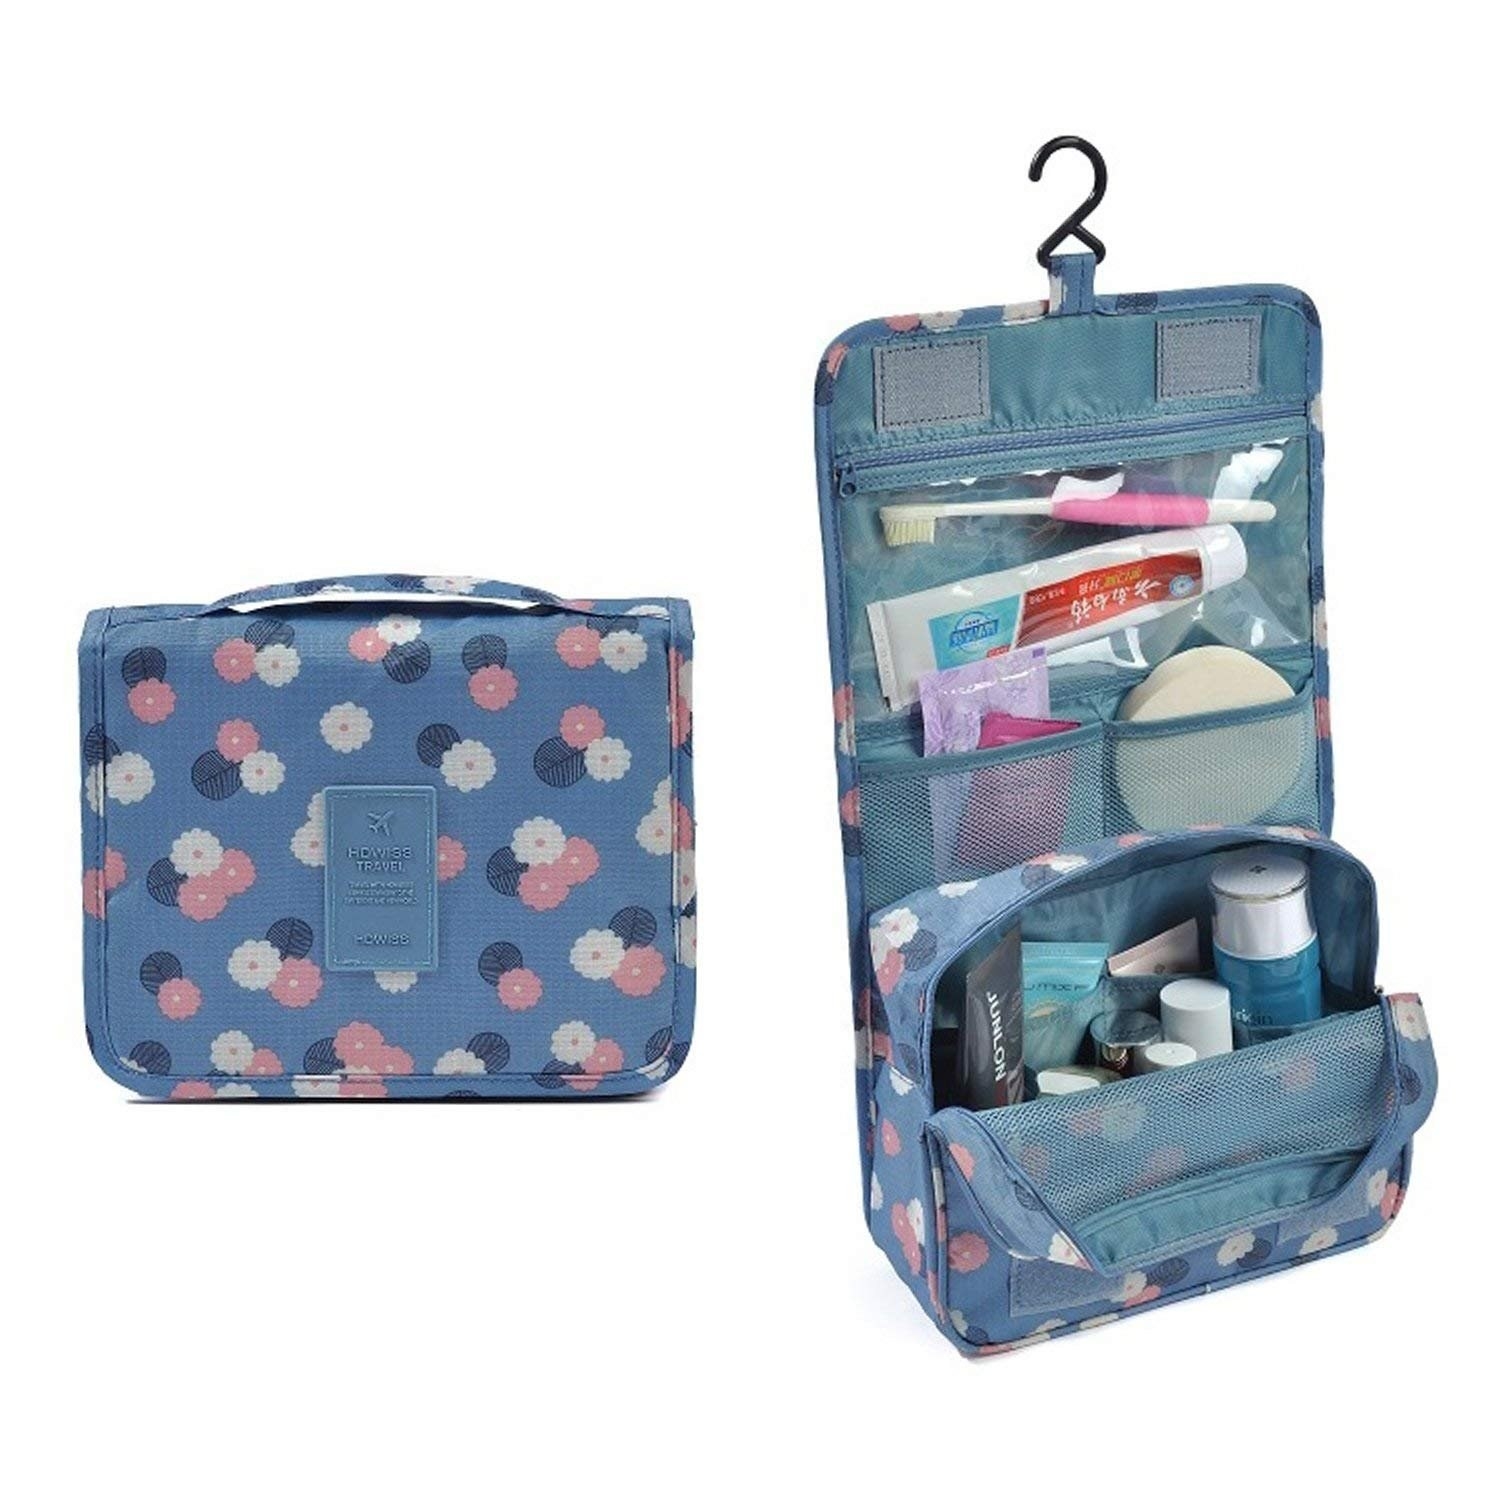 A blue portable multipurpose travel kit with flowers printed on it along with essentials kept inside that can be folded or hung from a hook